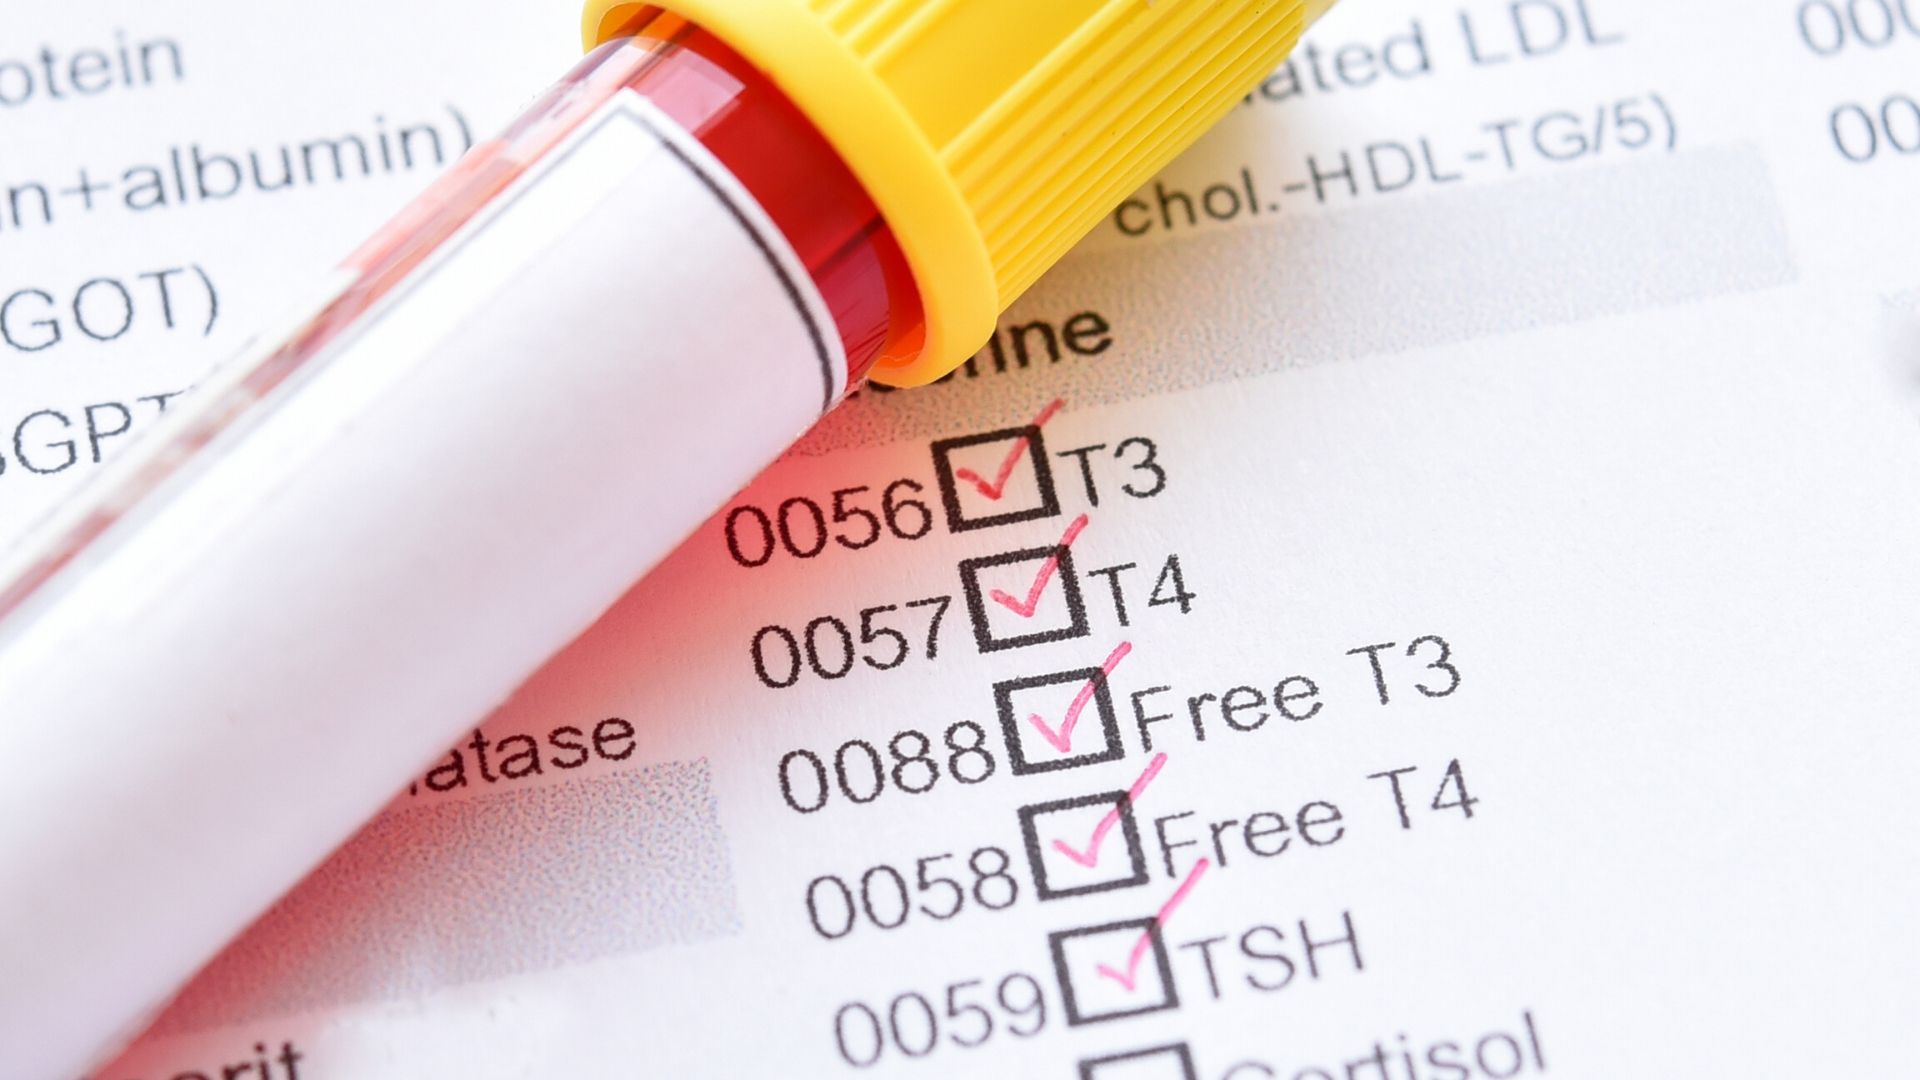 WHAT THYROID TESTS SHOULD BE DONE